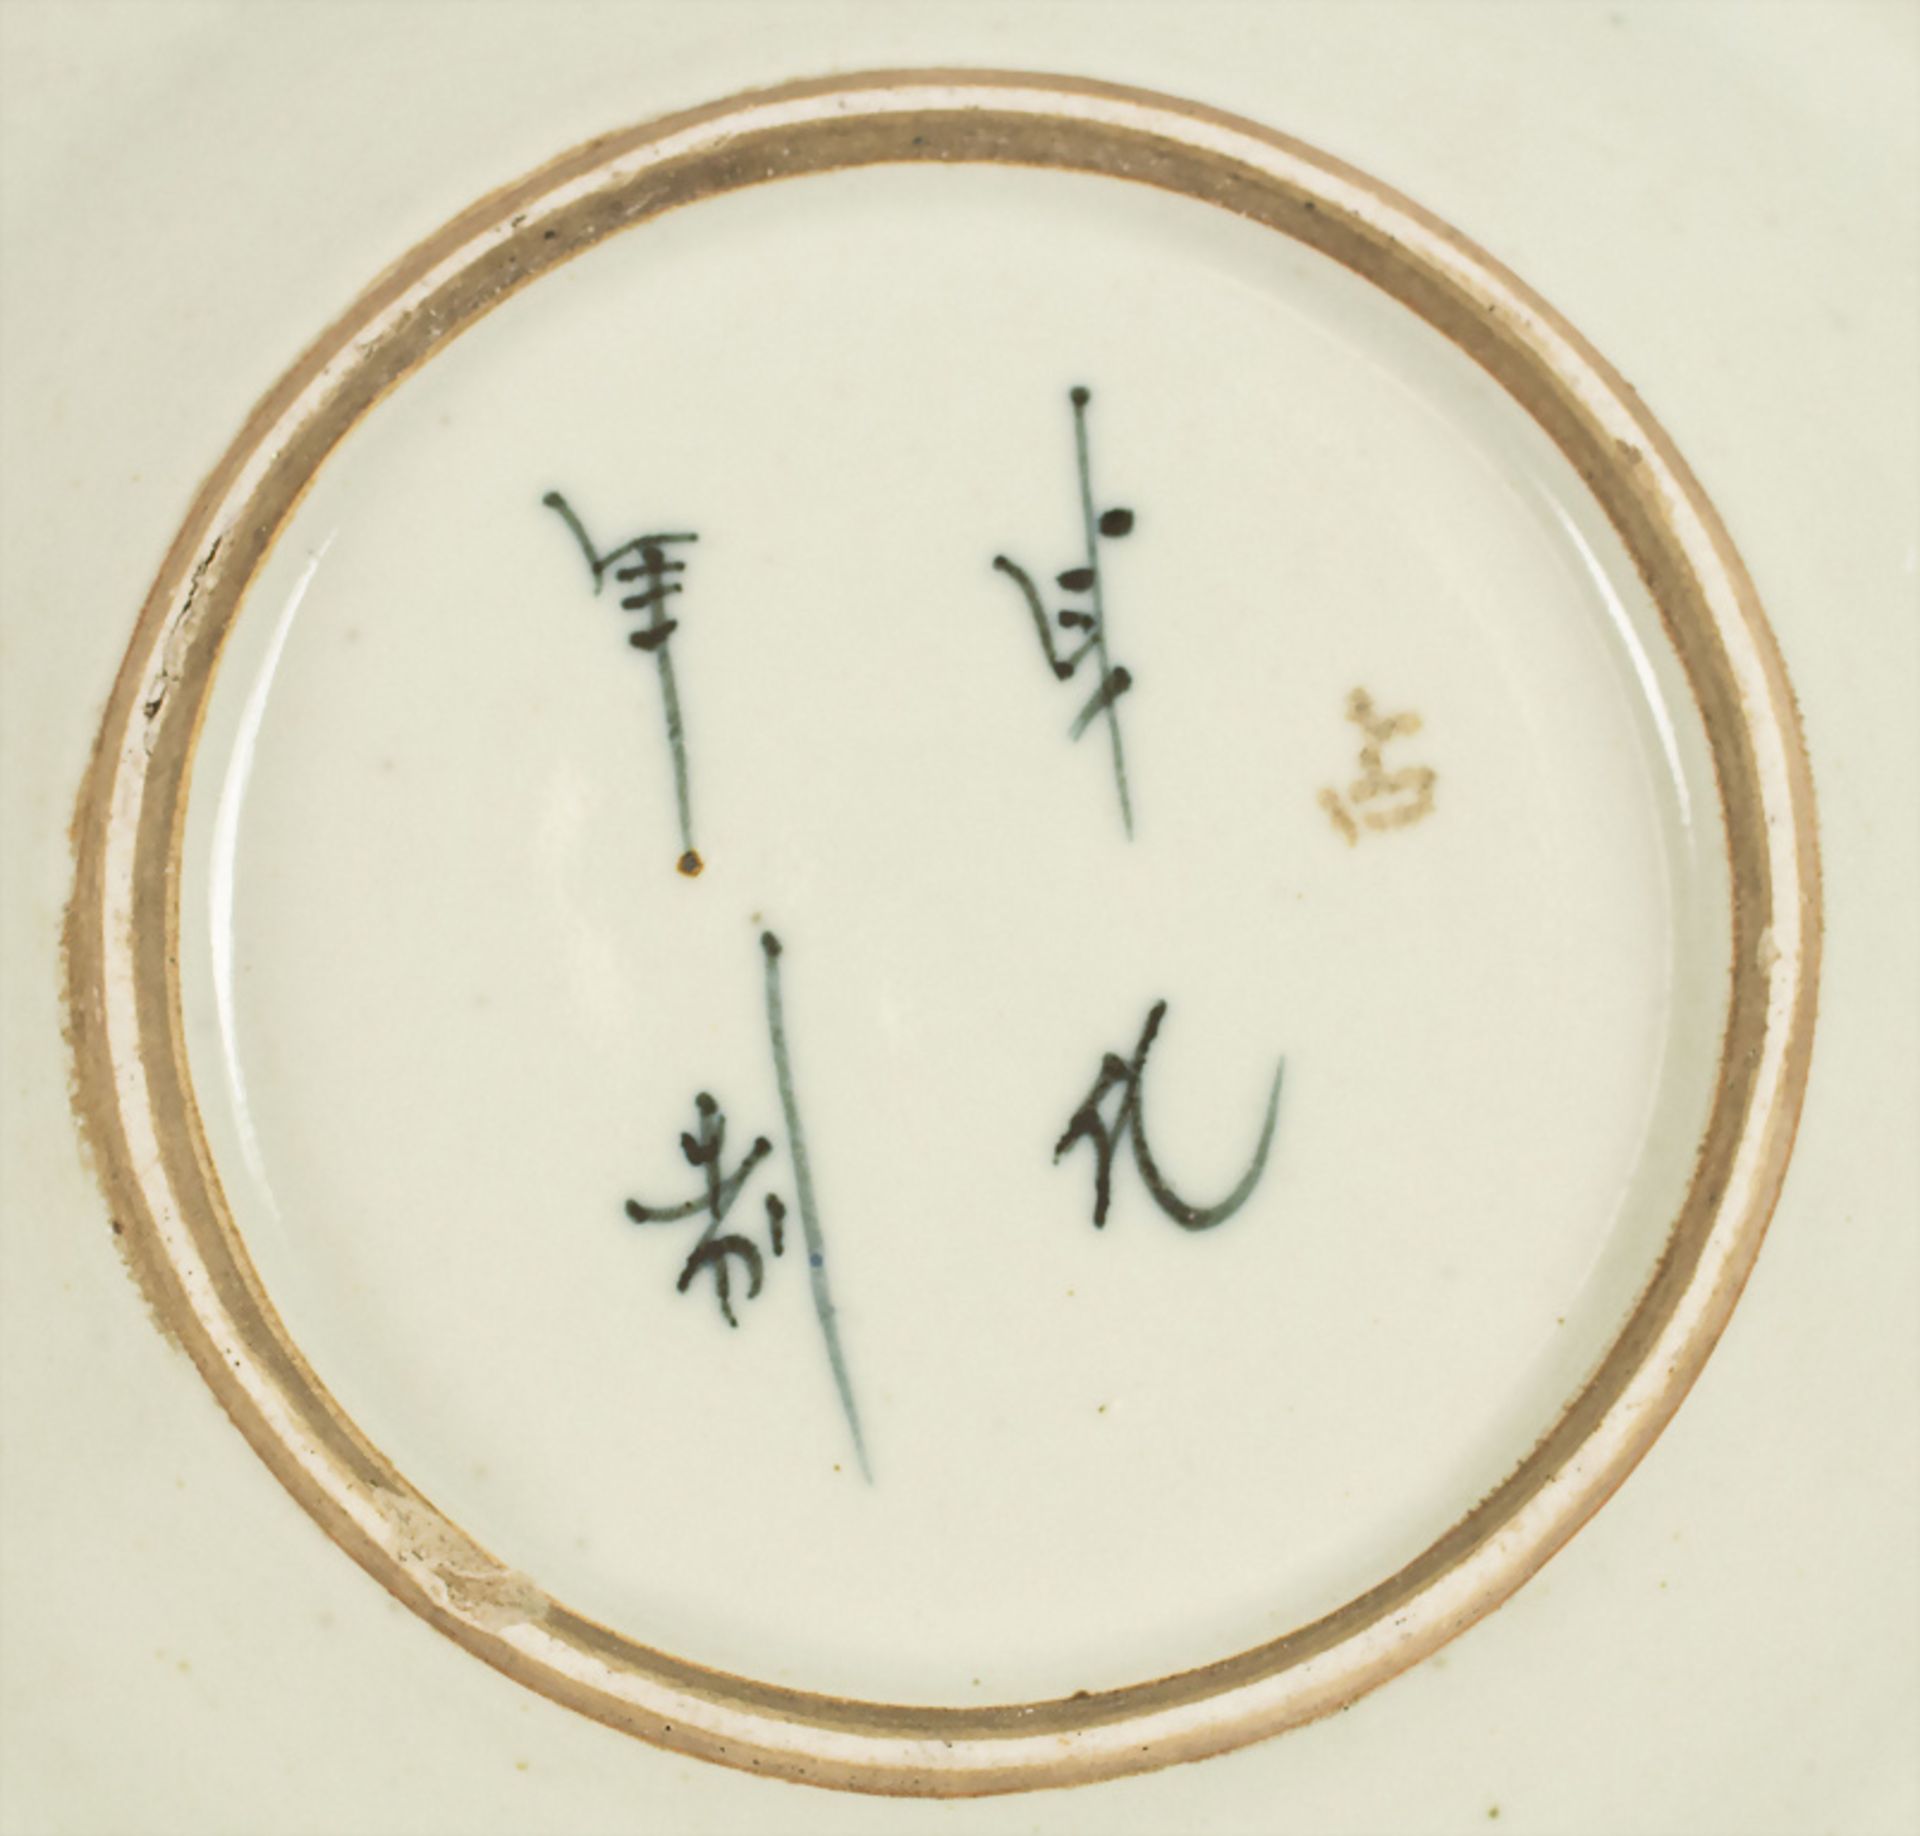 Bemalter Teller / A porcelain plate, China, Ming Dynastie, 16./17. Jh. - Image 2 of 2